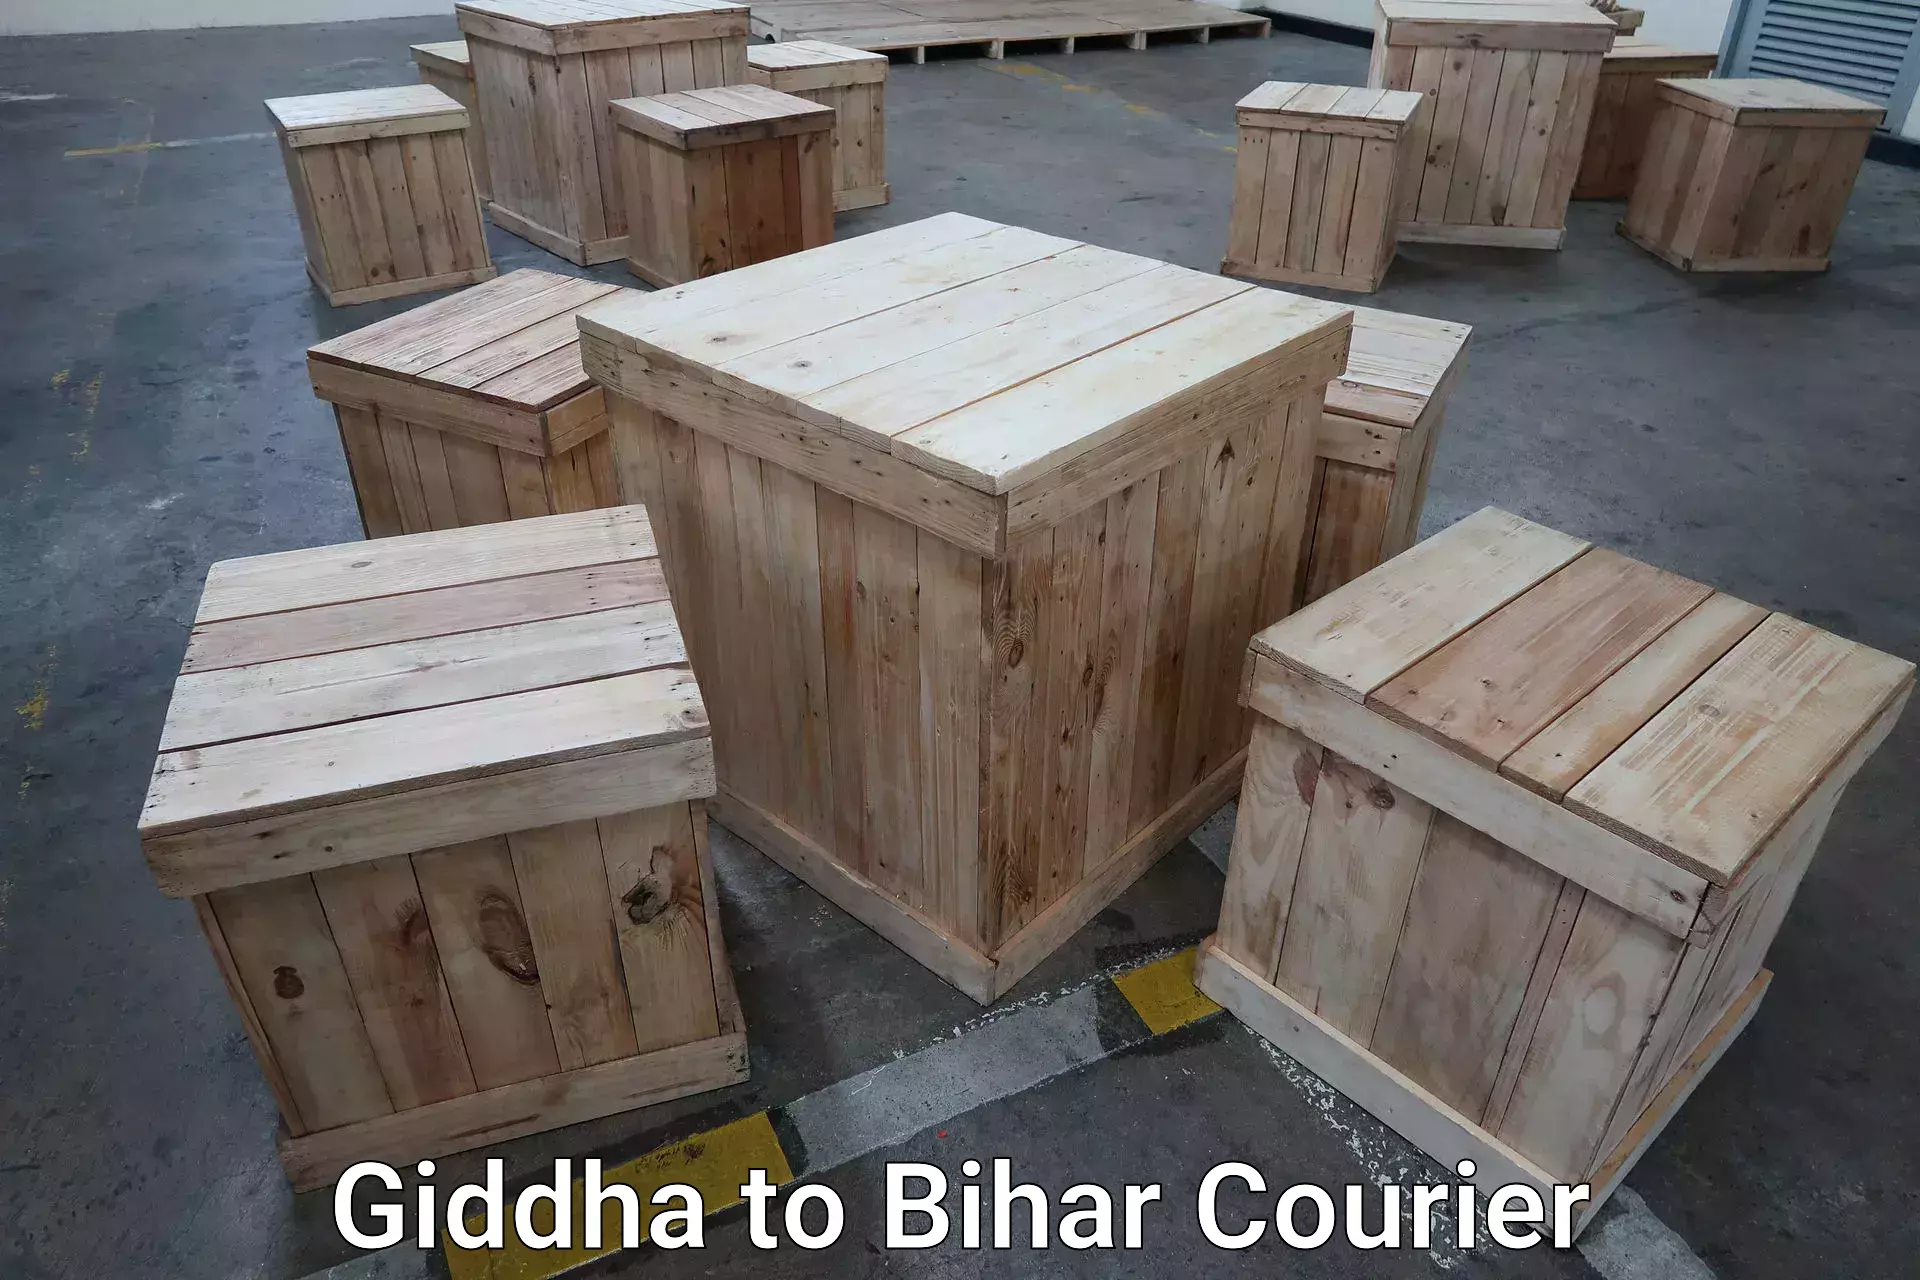 Baggage delivery scheduling Giddha to Bihar